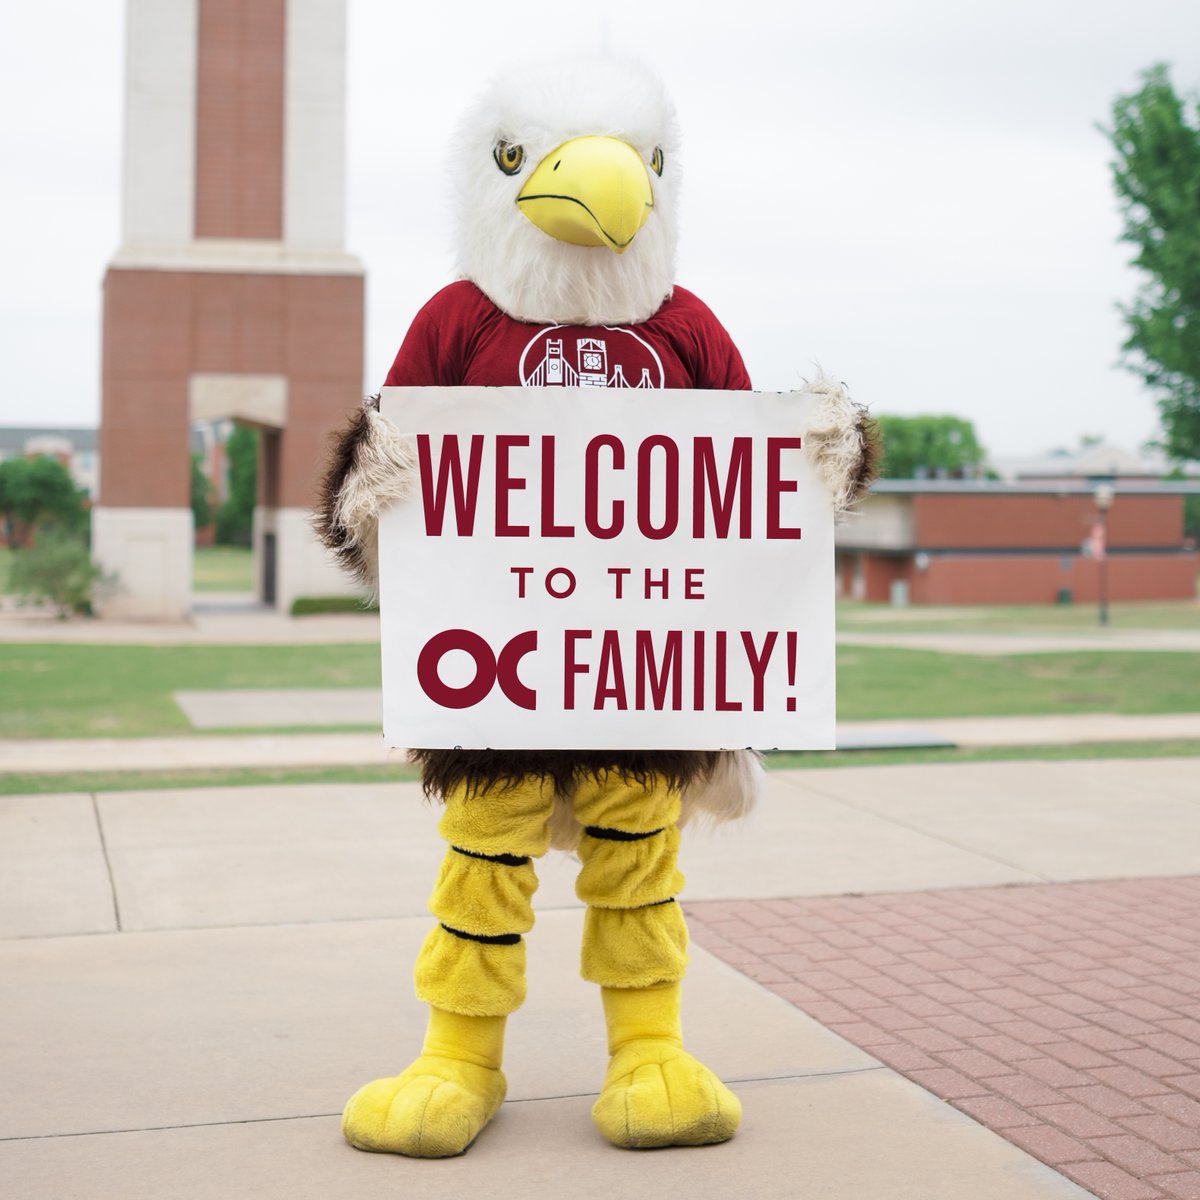 Today is #NationalCollegeDecisionDay! We are thrilled to have you join us as you begin this new chapter of your journey. We are delighted you've chosen OC as your home for the next four years. 🦅❤️ Your Story. God's Purpose. #OKC #Oklahoma #Christian #StudentLife